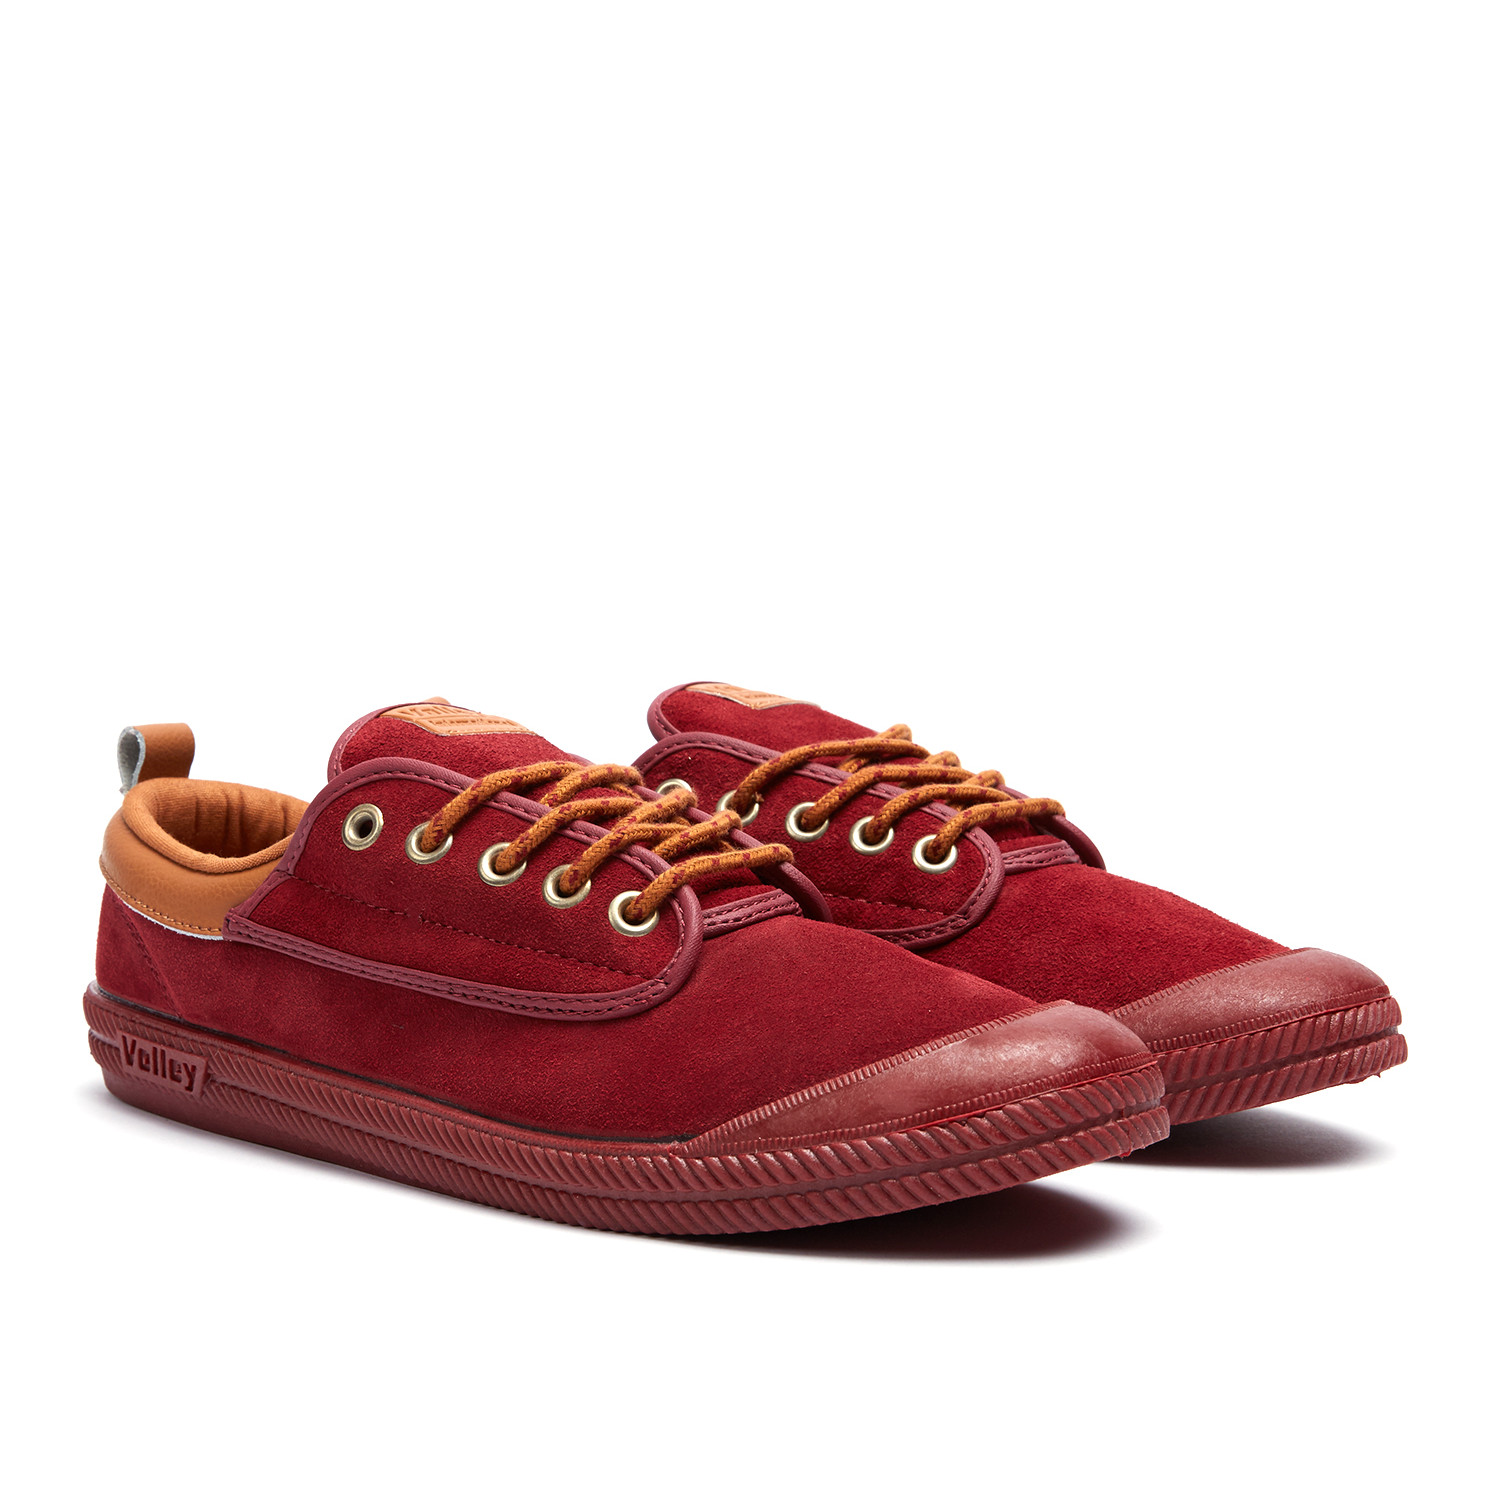 Perforated Suede Sneaker // Maroon + Mustard (US: 6) - Volley Shoes ...